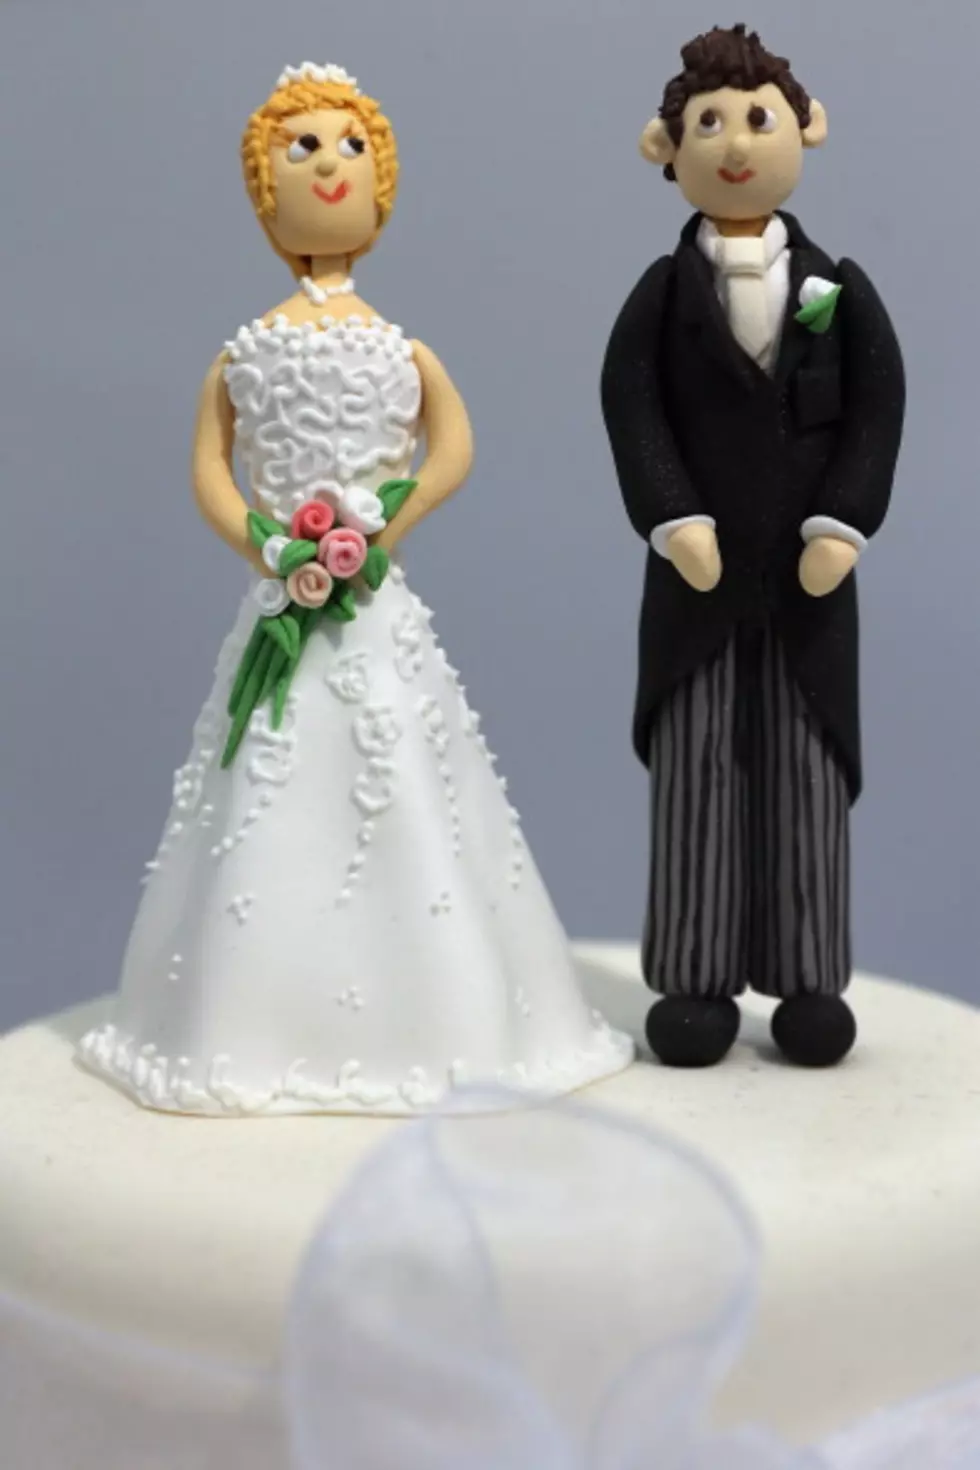 Keeping Your Maiden Name Vs. Taking Your Husband’s Name